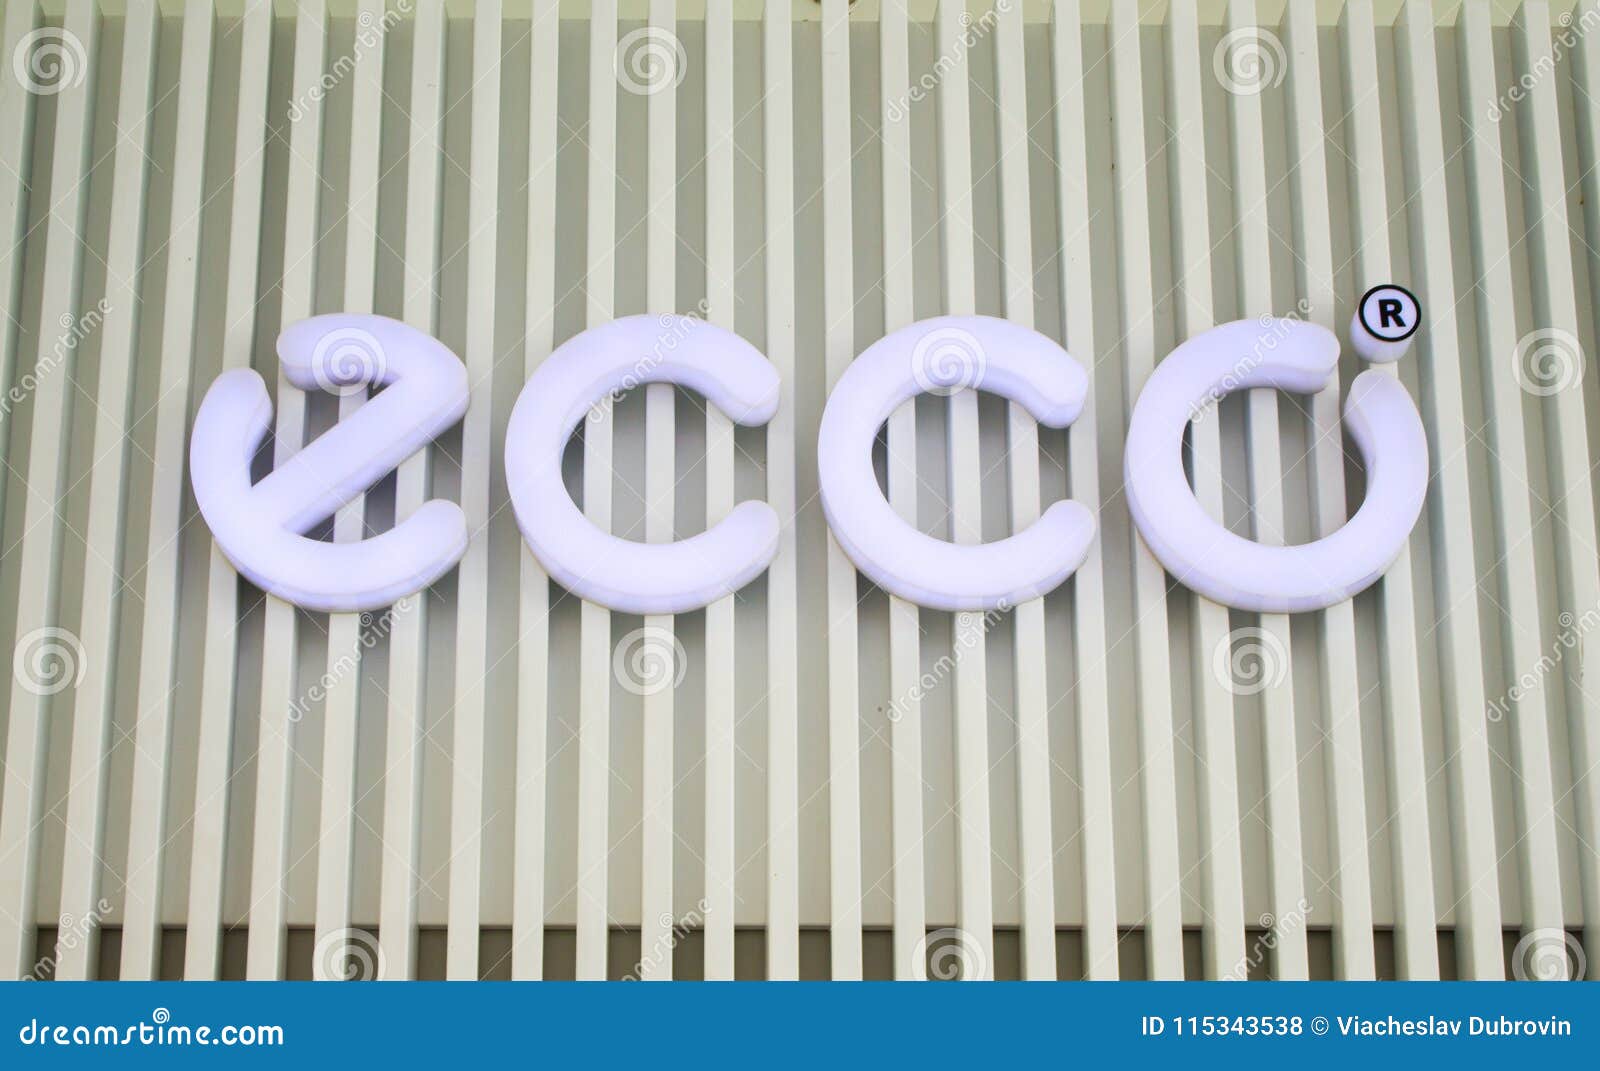 Manila, Philippines - June, 2016: Logo of Famous Shoes Brand Ecco in Mall of Asia, Manila, Philippines. Editorial Photo - Image of fashion, marketing: 115343538